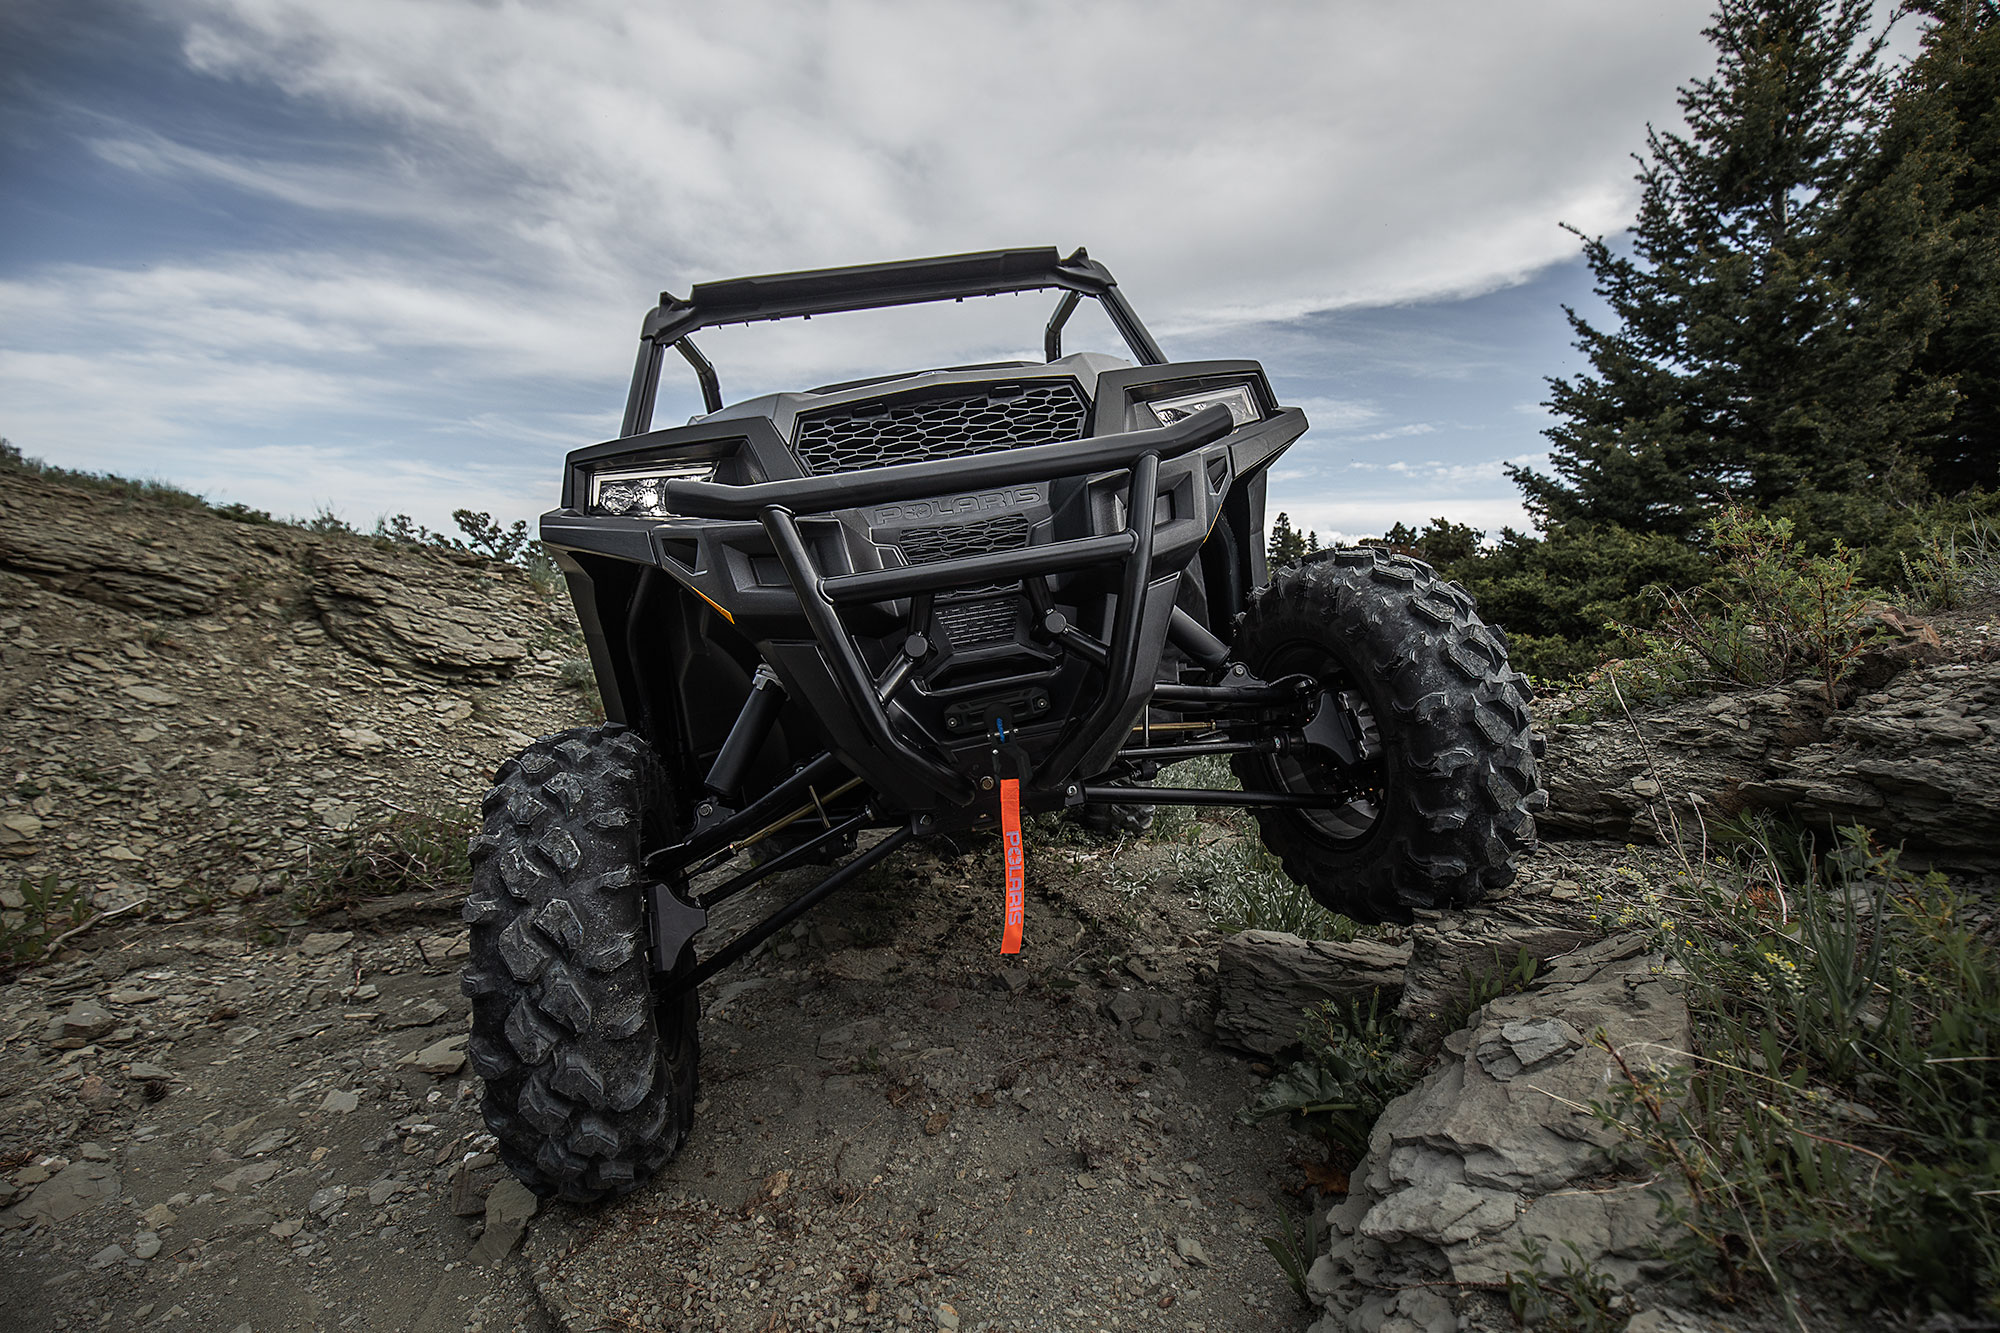 Polaris General XP 1000 Review: A UTV That Strikes a Balance Between Work and Adventure